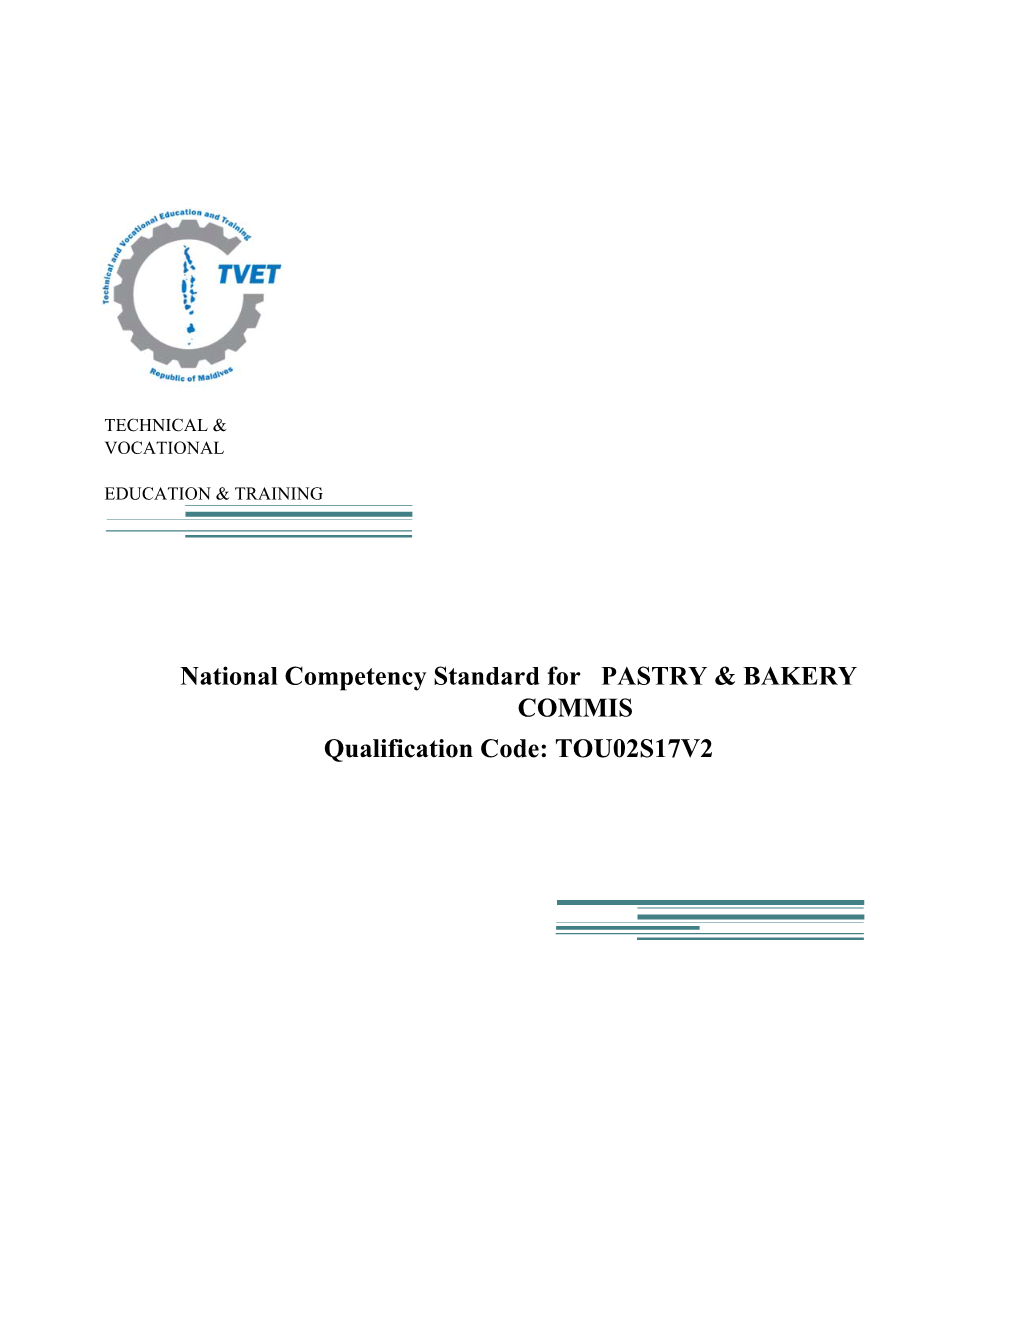 National Competency Standard for PASTRY & BAKERY COMMIS Qualification Code: TOU02S17V2